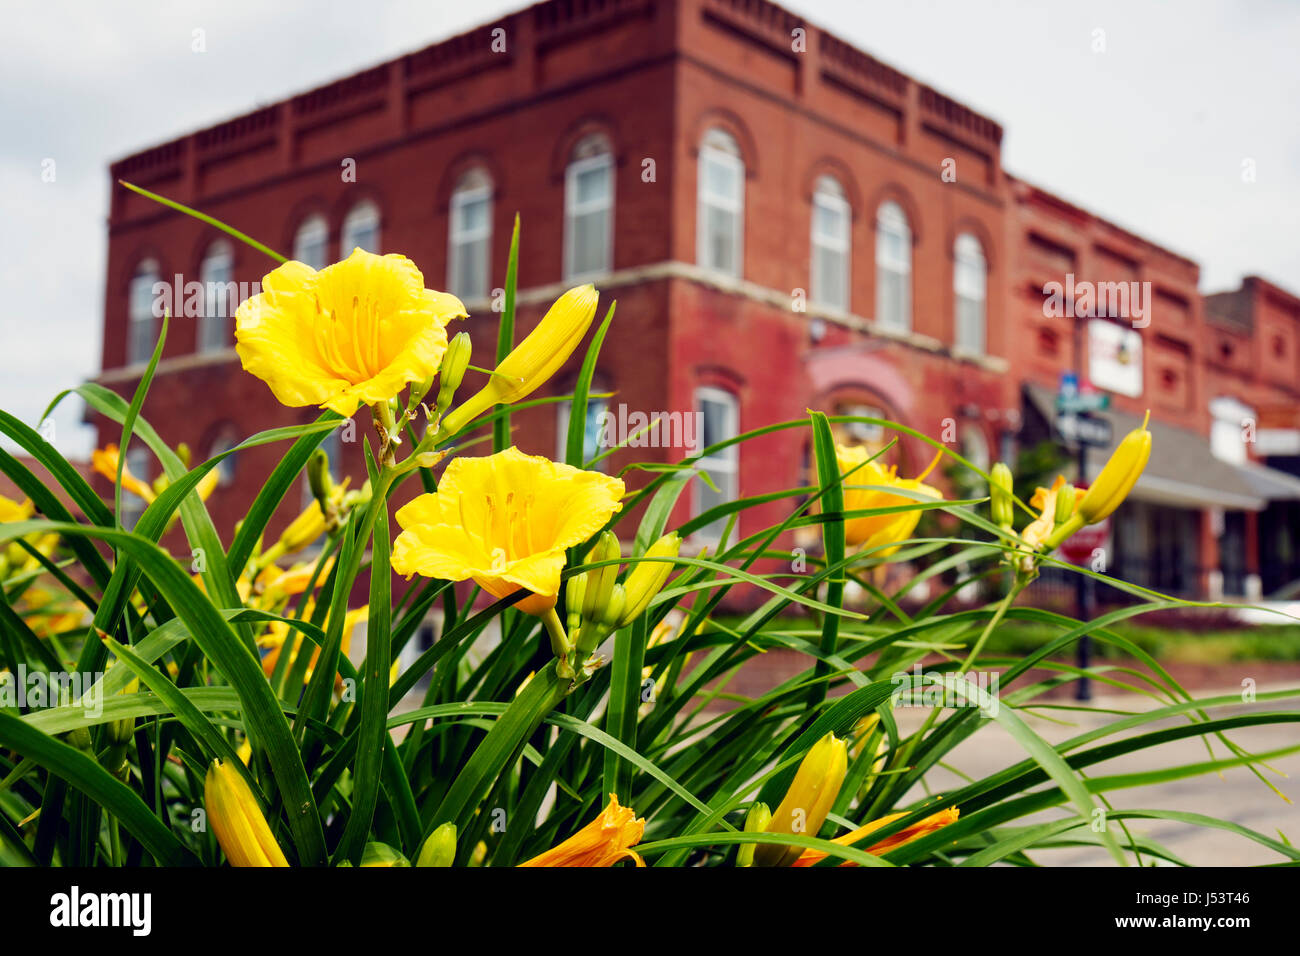 Arkansas Randolph County,Pocahontas,Old historic Courthouse Square,red brick,building,planter,flower,flower,flower,blossom,yellow,foreground,Stella d' Stock Photo